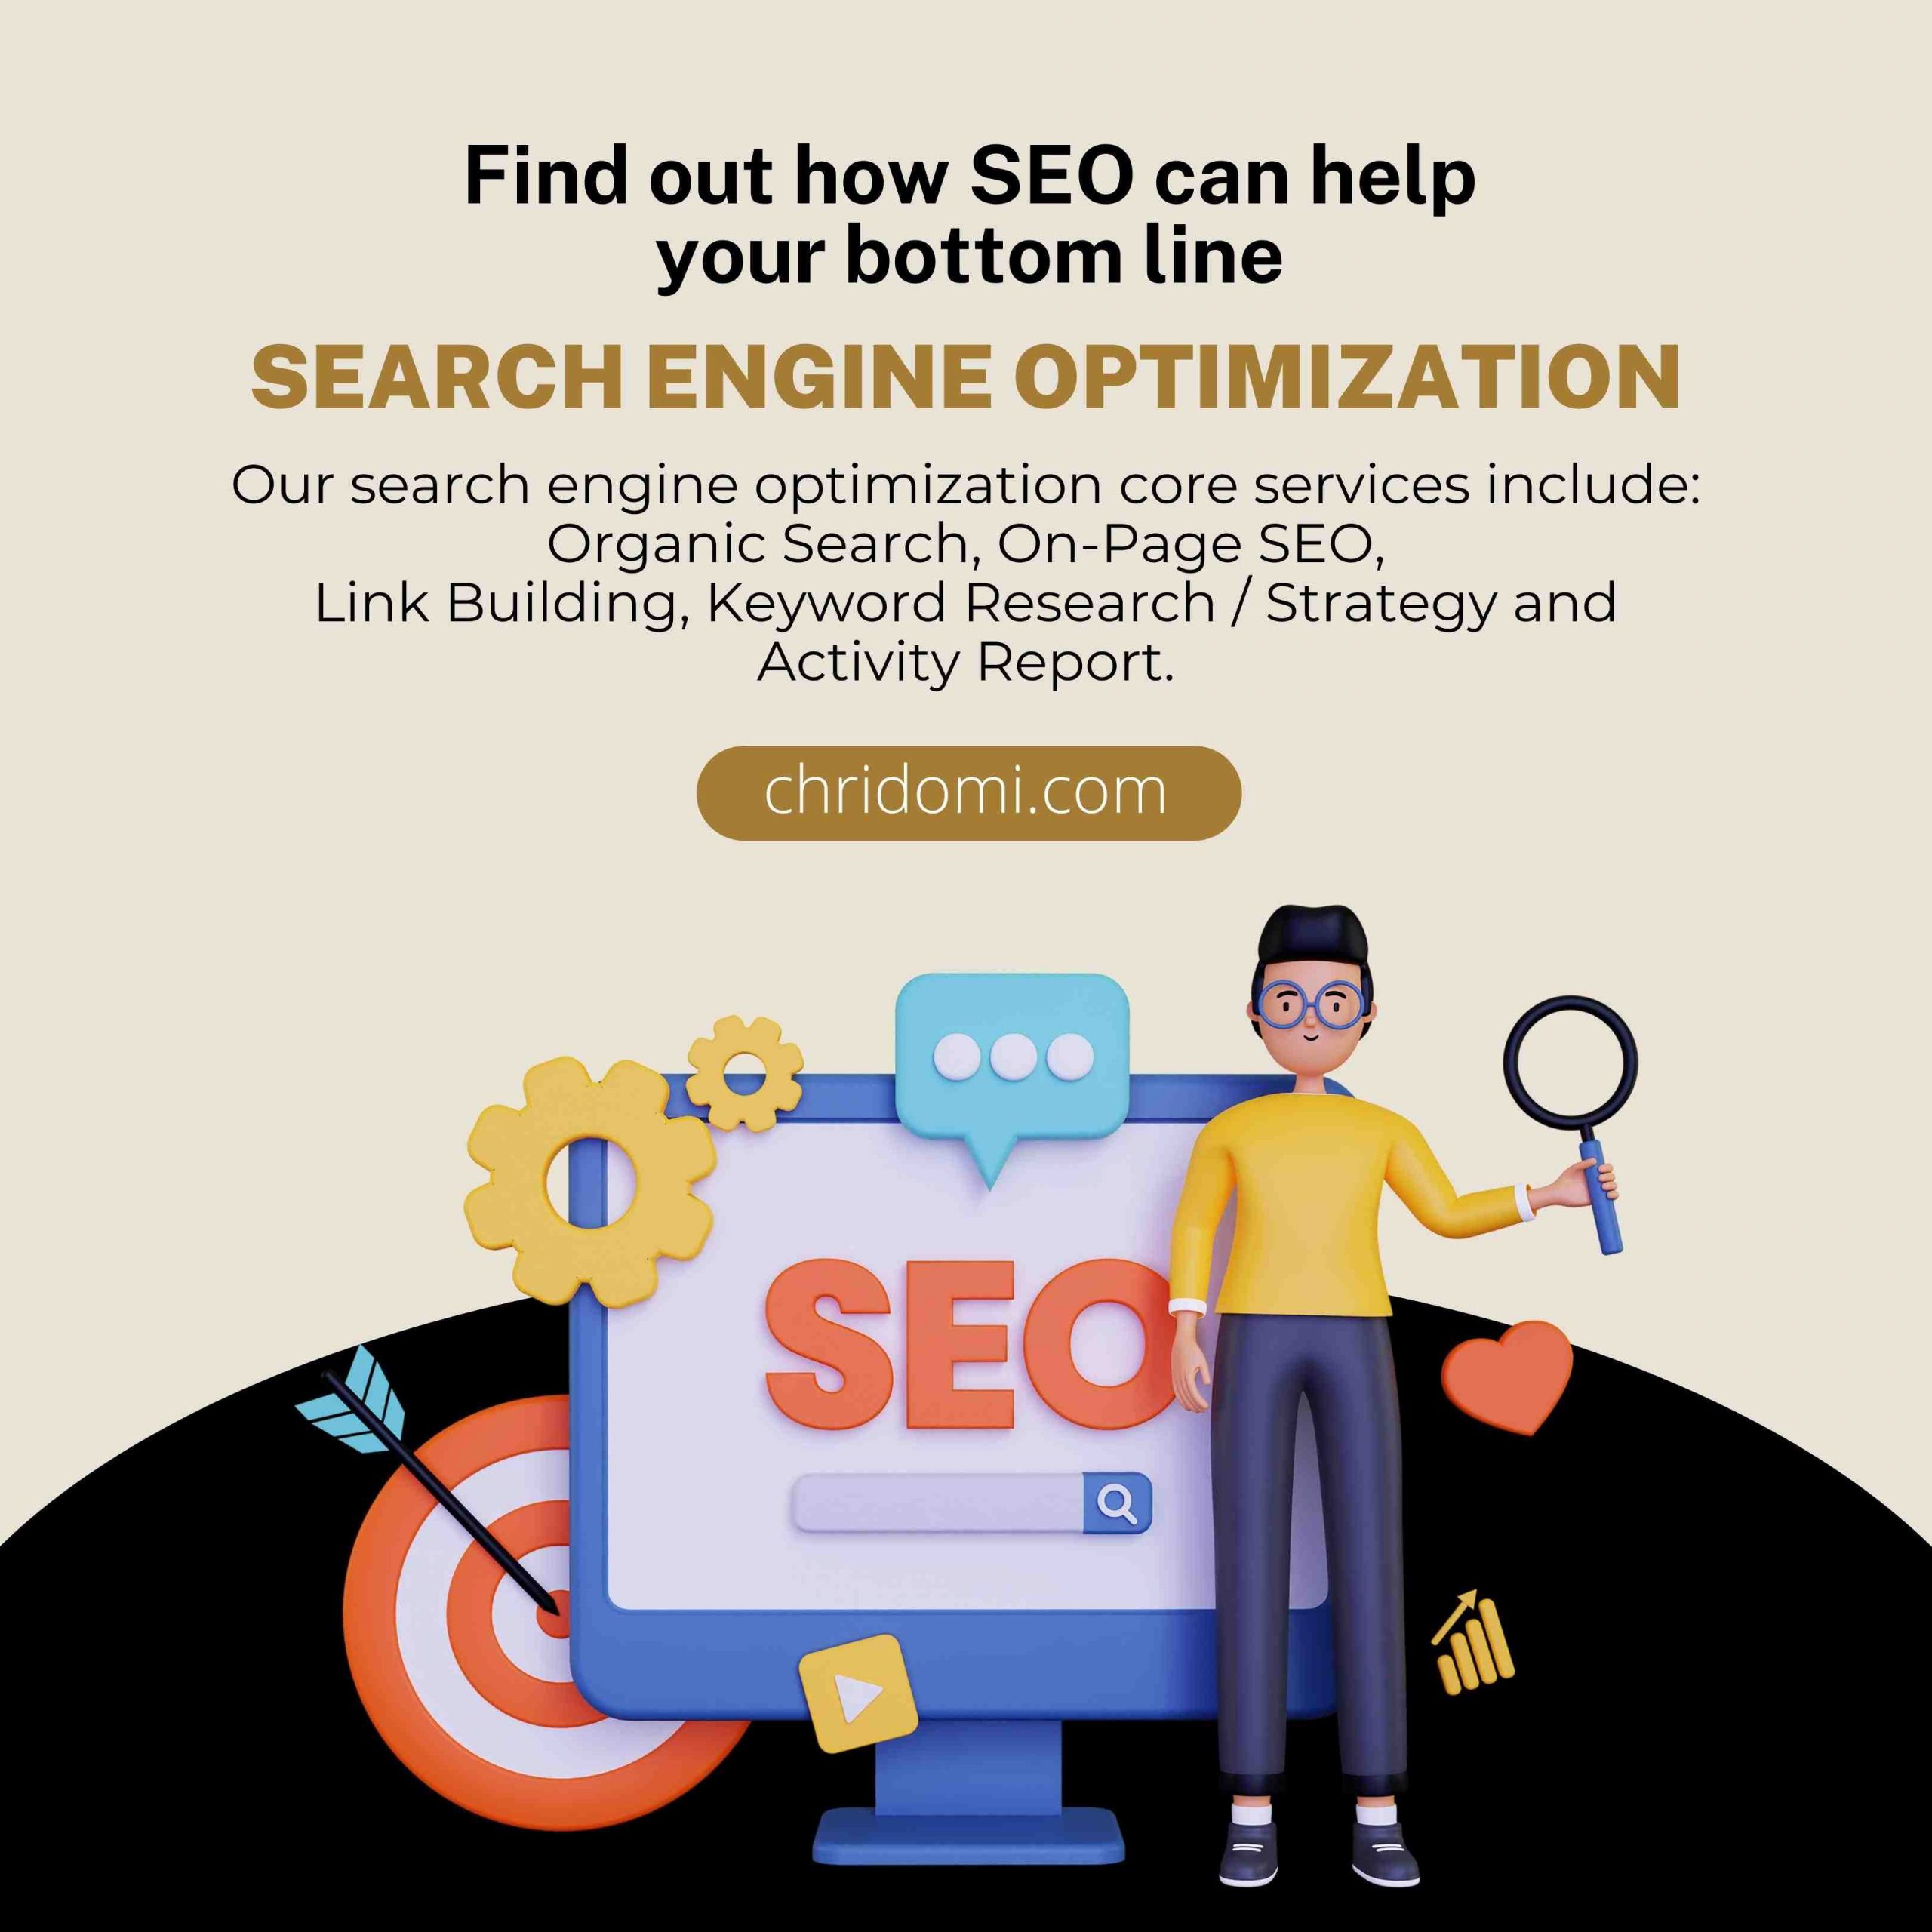 What is an example of SEO?